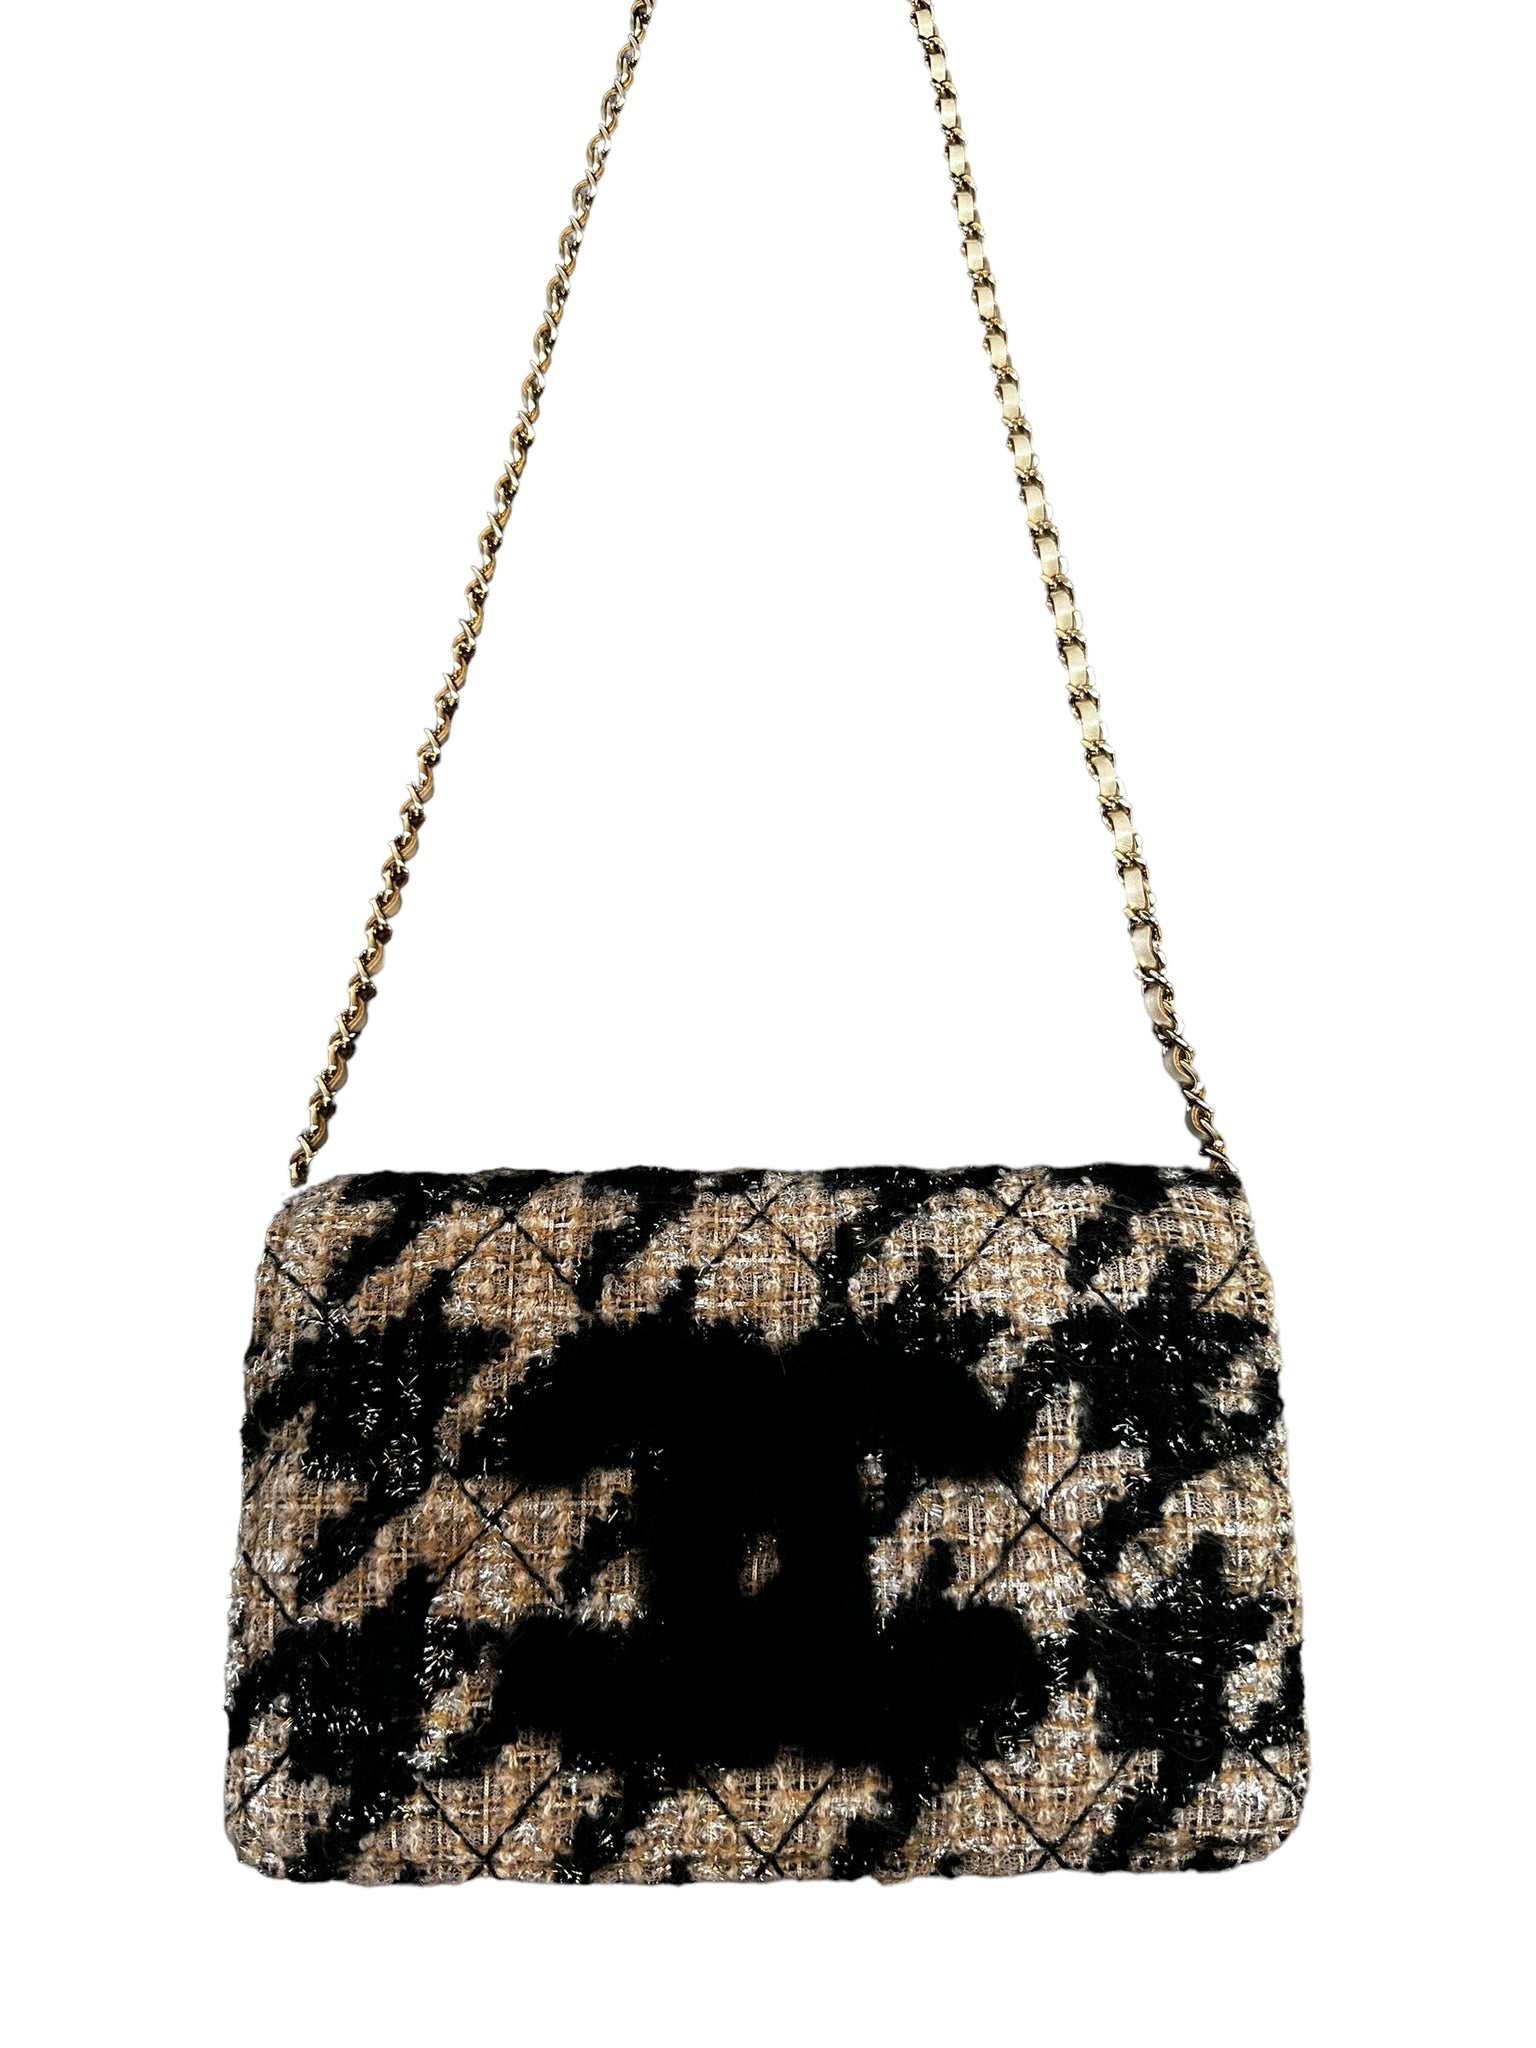 Chanel Black And White Tweed And Shearling Houndstooth Classic Single Flap  Bag Square Mini Antique Gold Hardware 2020 Available For Immediate Sale At  Sothebys